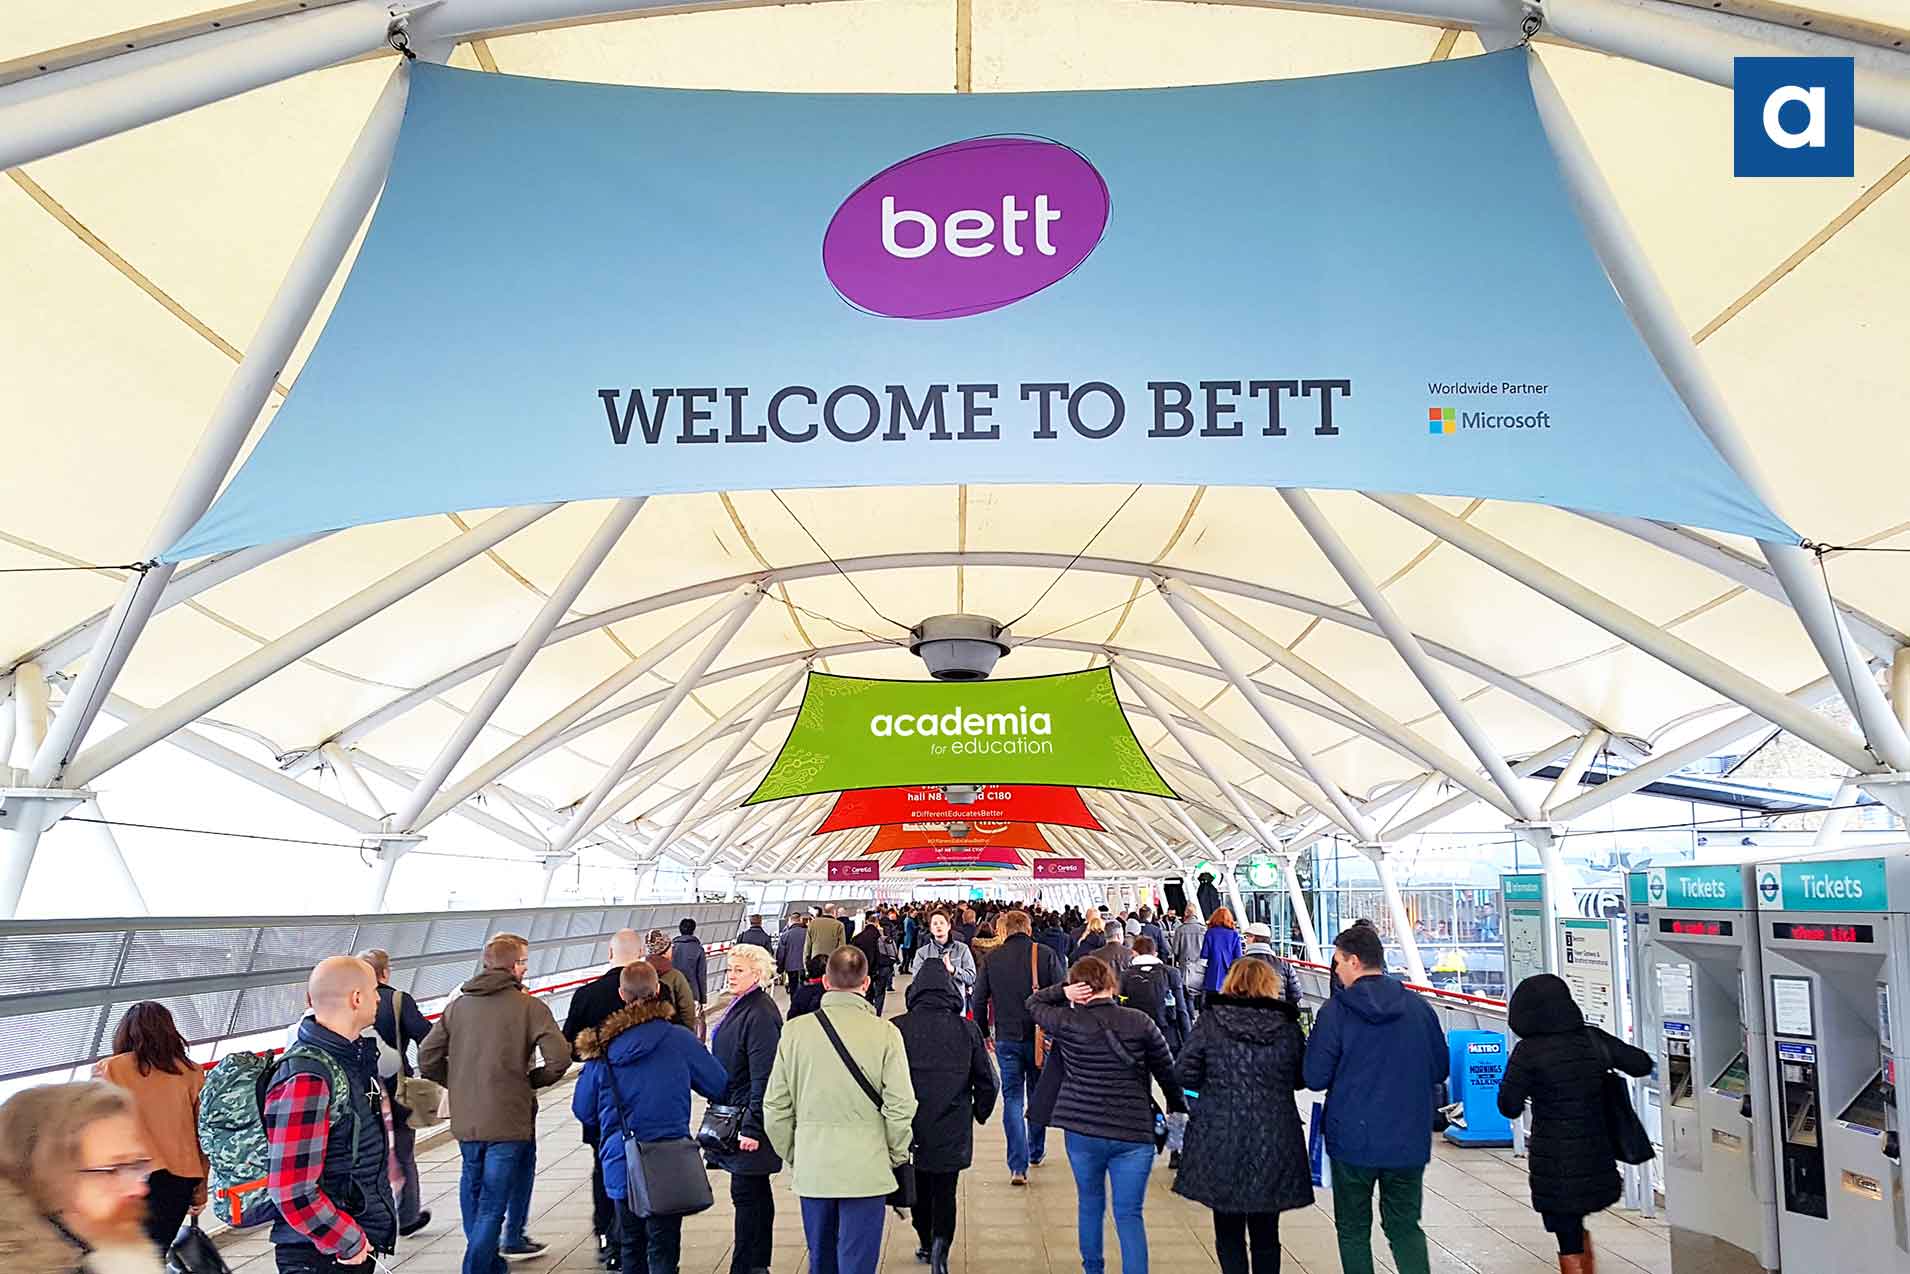 Academia at BETT 2019 – What you may have missed?